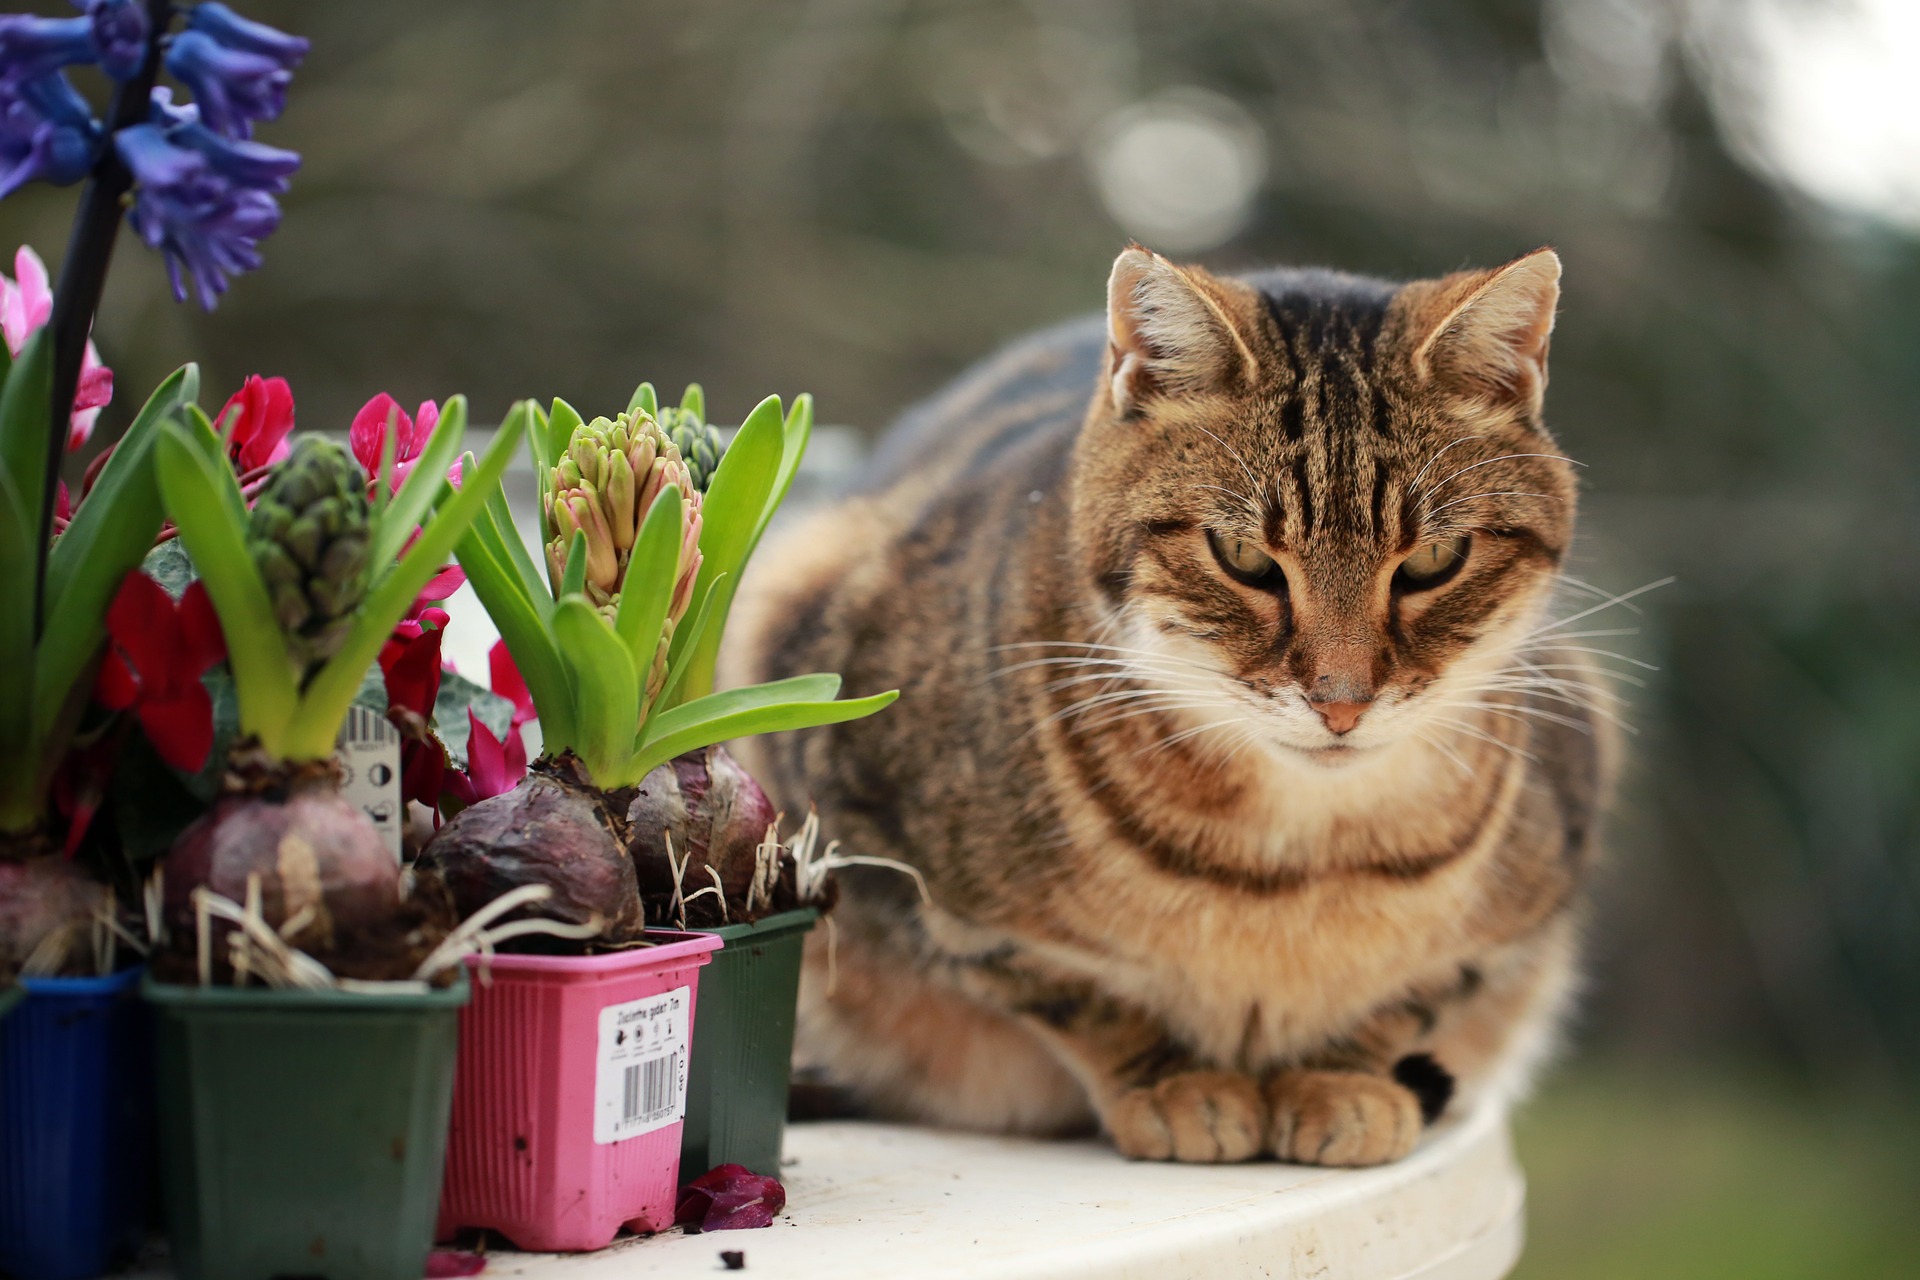 Are You Planting Pet Poisons in Your Yard?